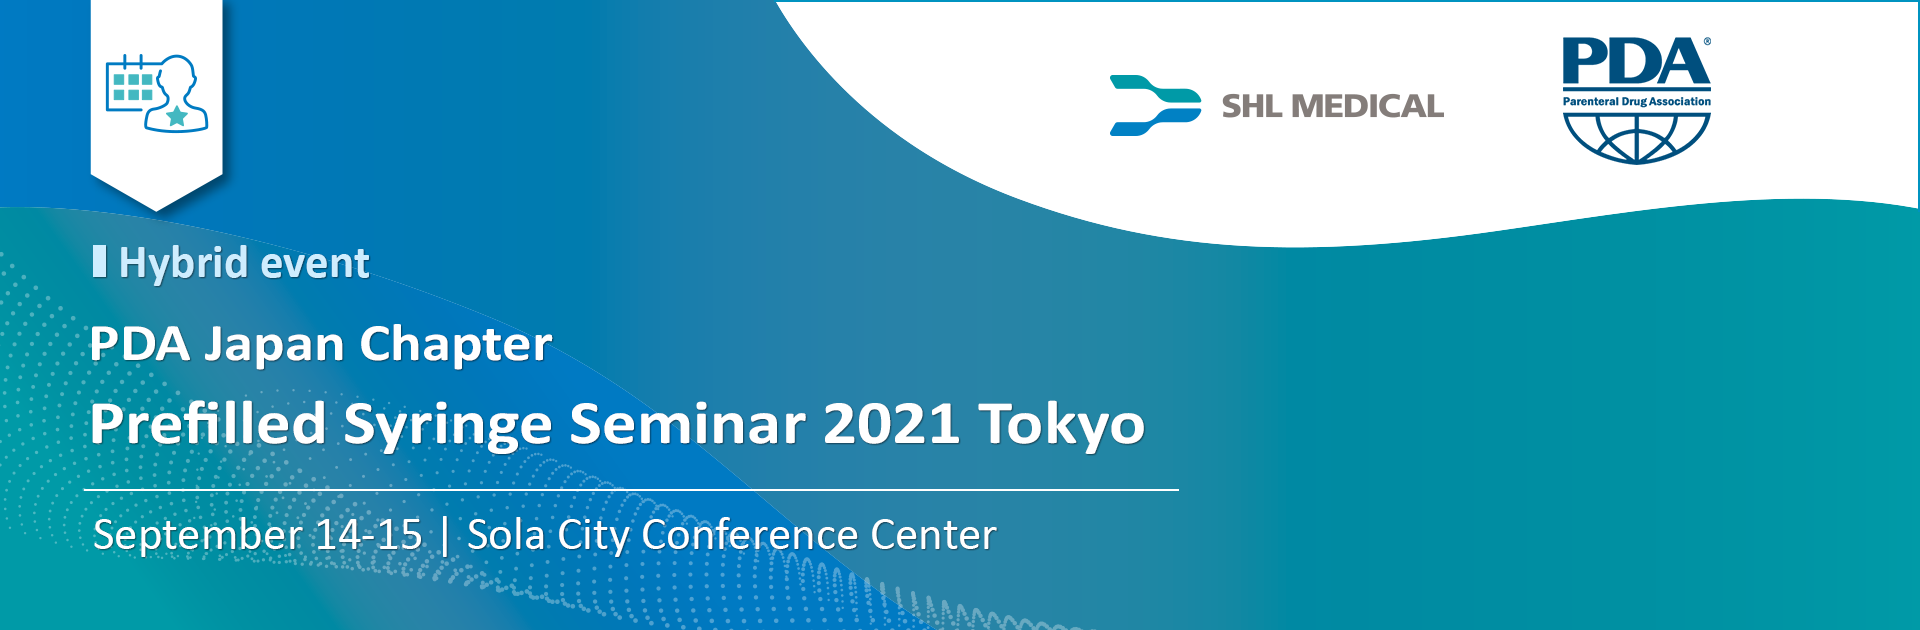 Banner of an article titled “SHL Medical participates in 2021 PFSS Tokyo” held on September 14-15 in Sola City Conference Center